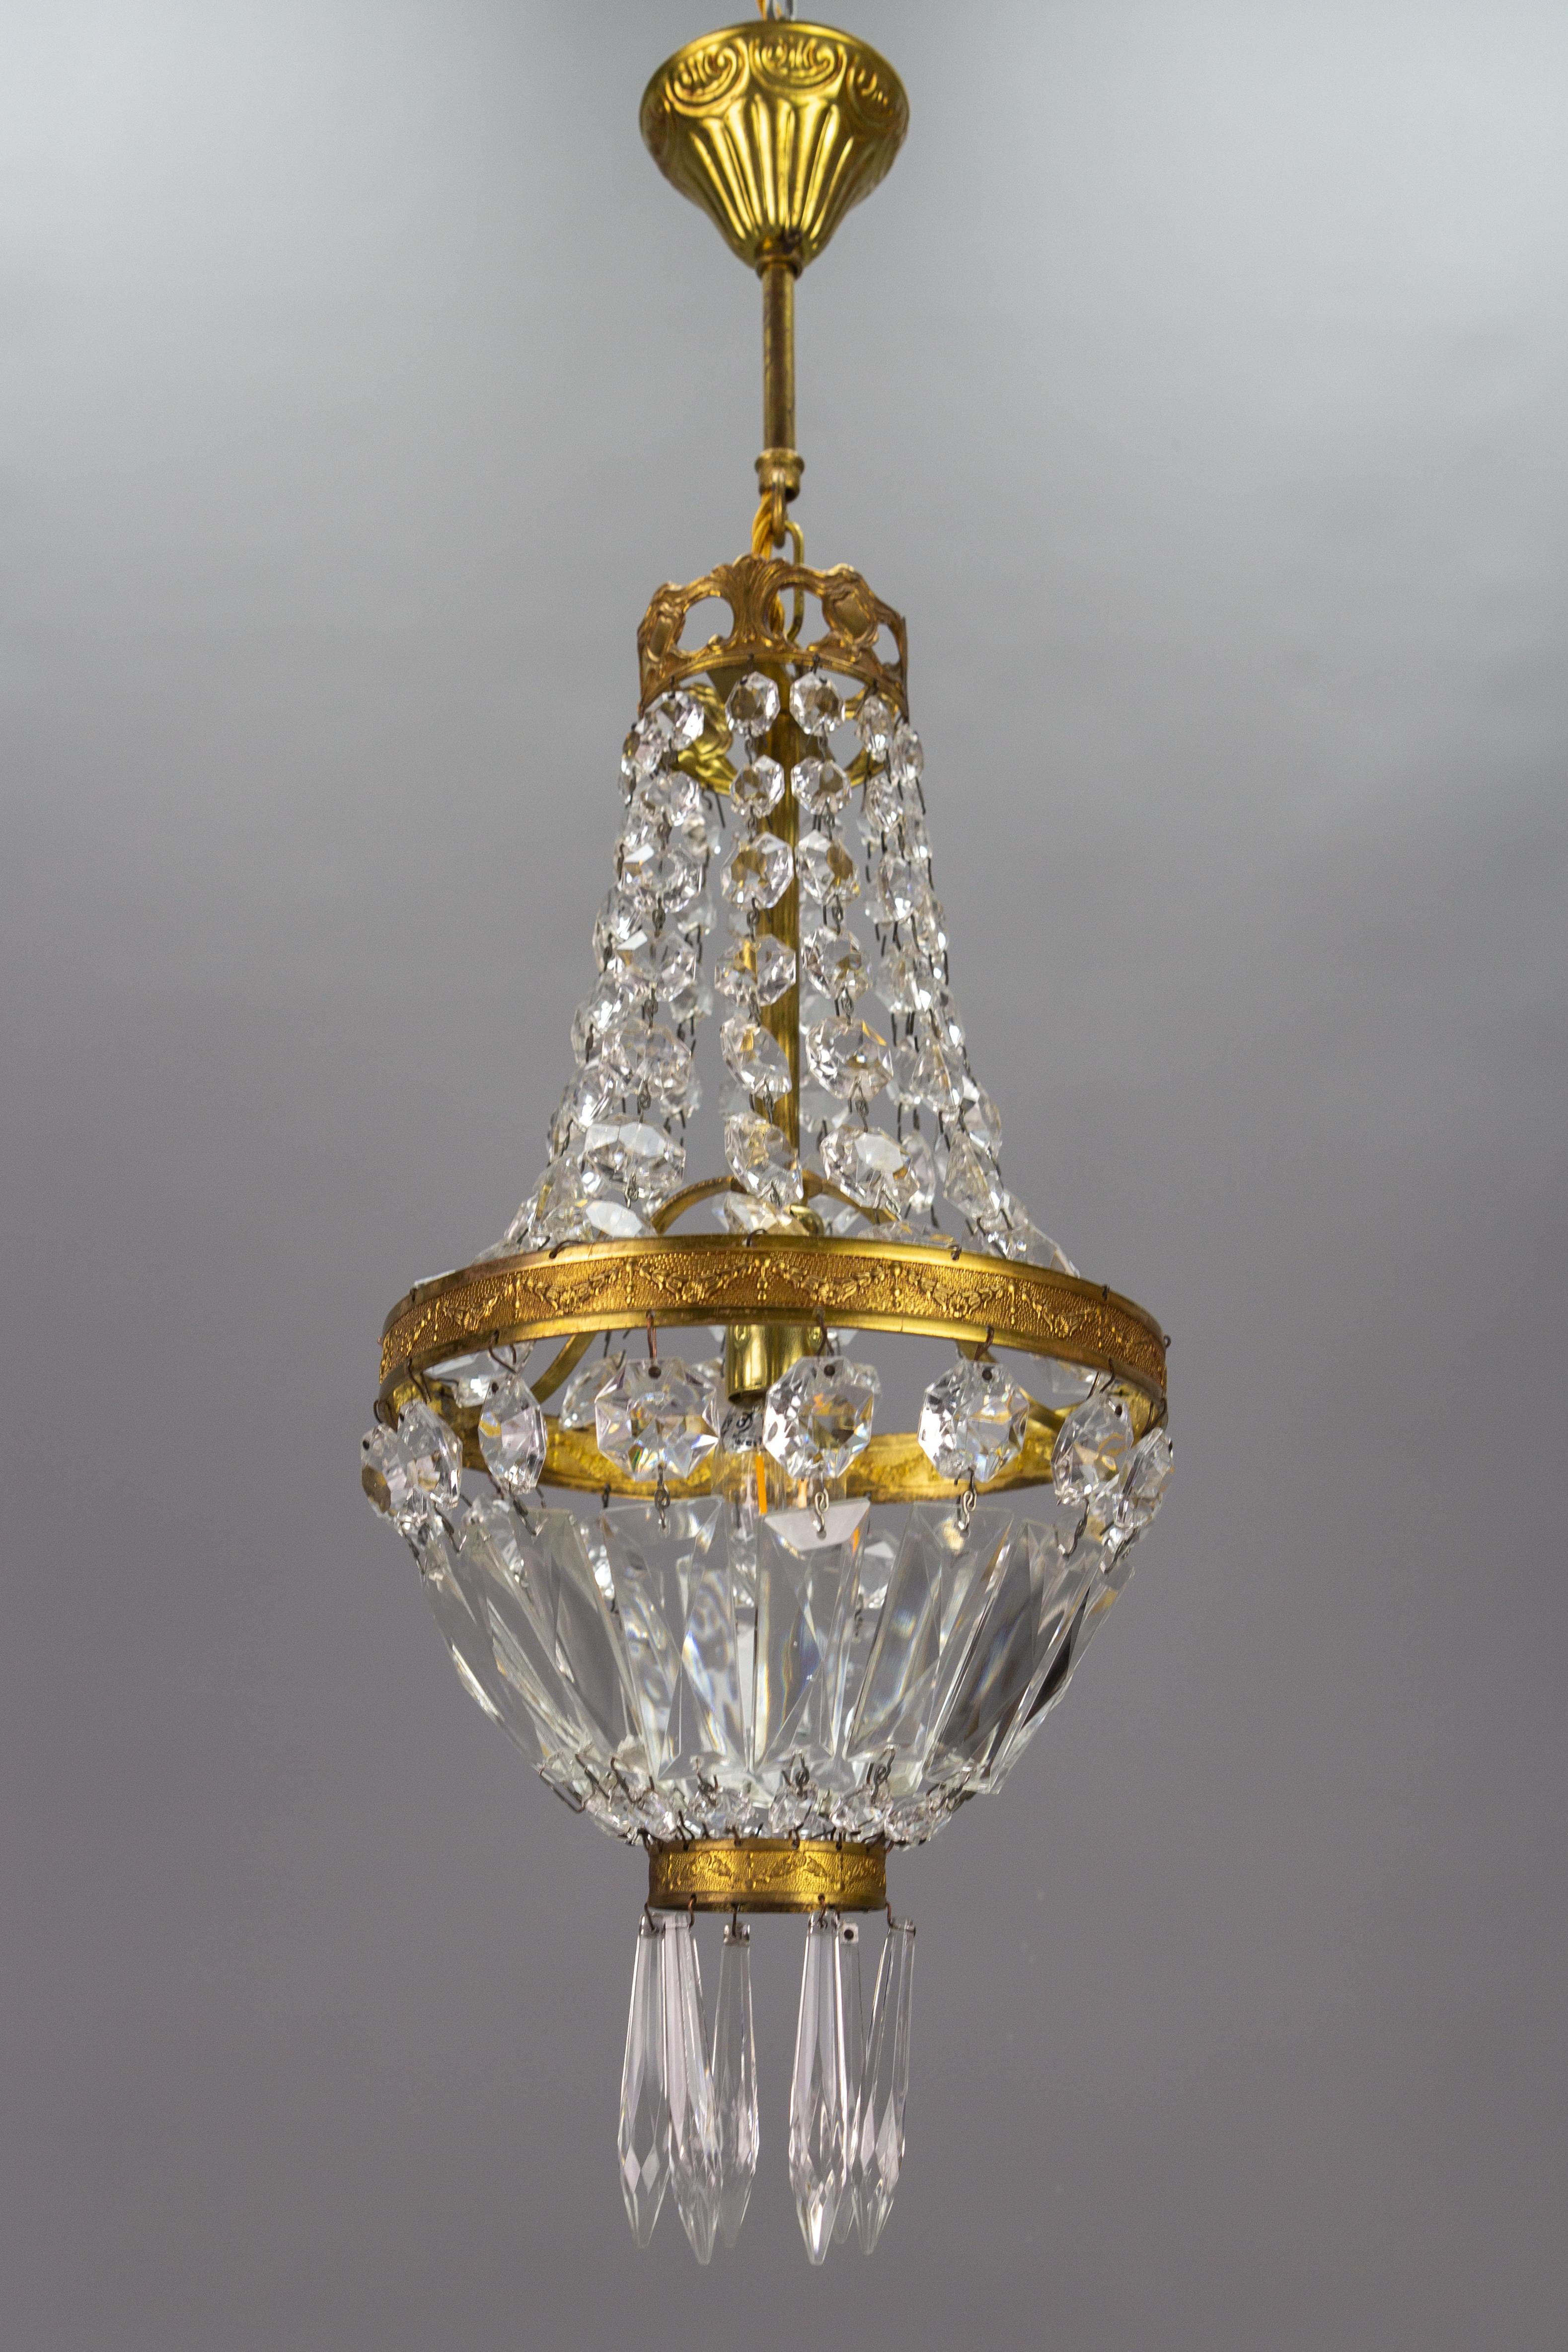 French Empire-style brass and crystal glass basket chandelier.
Charming and compact French Empire-style crystal glass and brass chandelier from the 1950s. This lovely piece has an ornate brass frame hung with chains of crystal glass beads and prisms